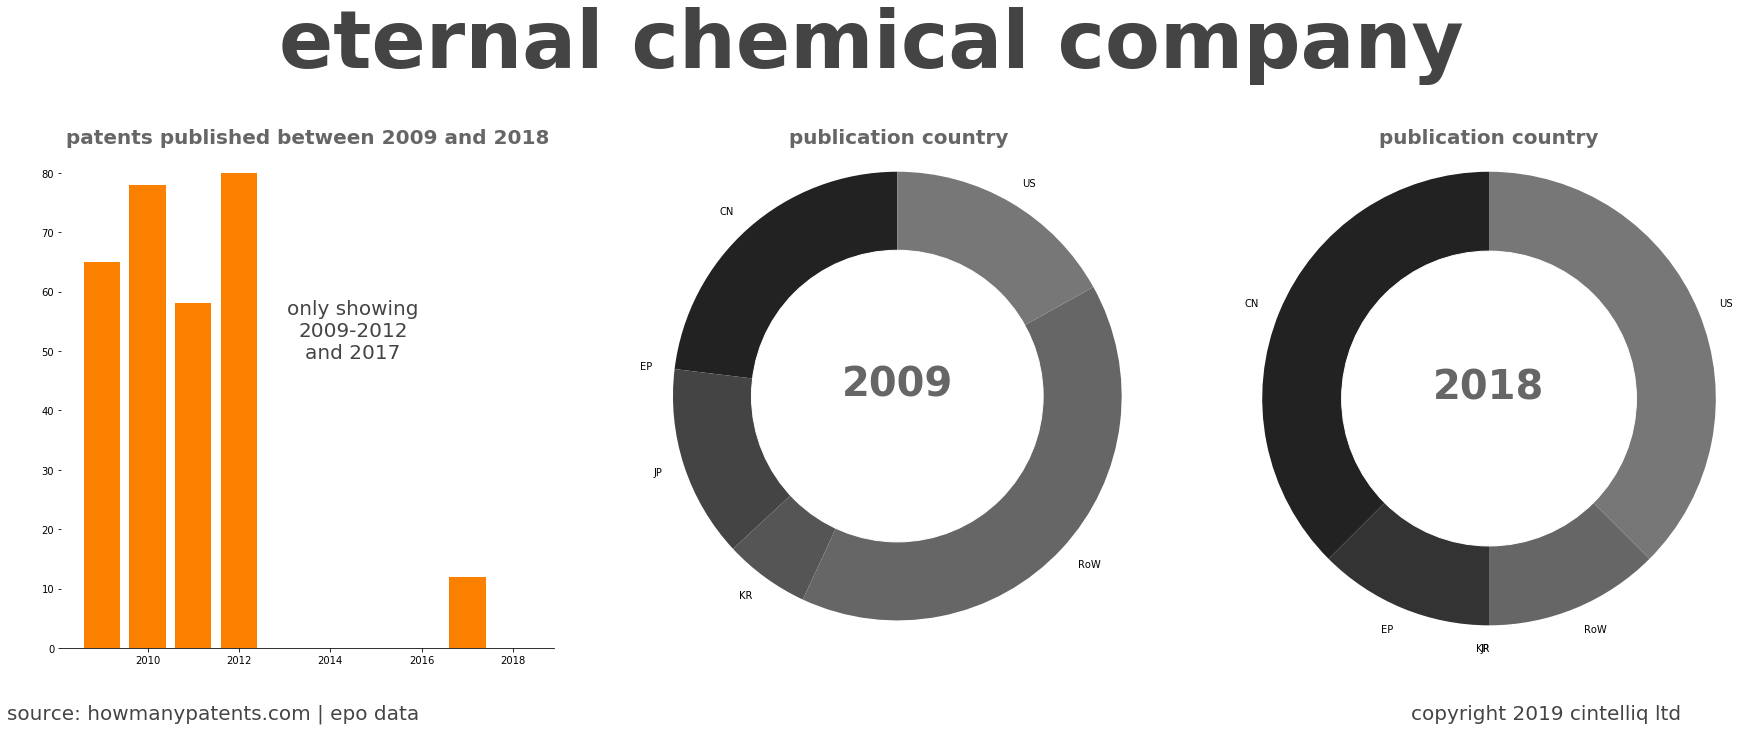 summary of patents for Eternal Chemical Company